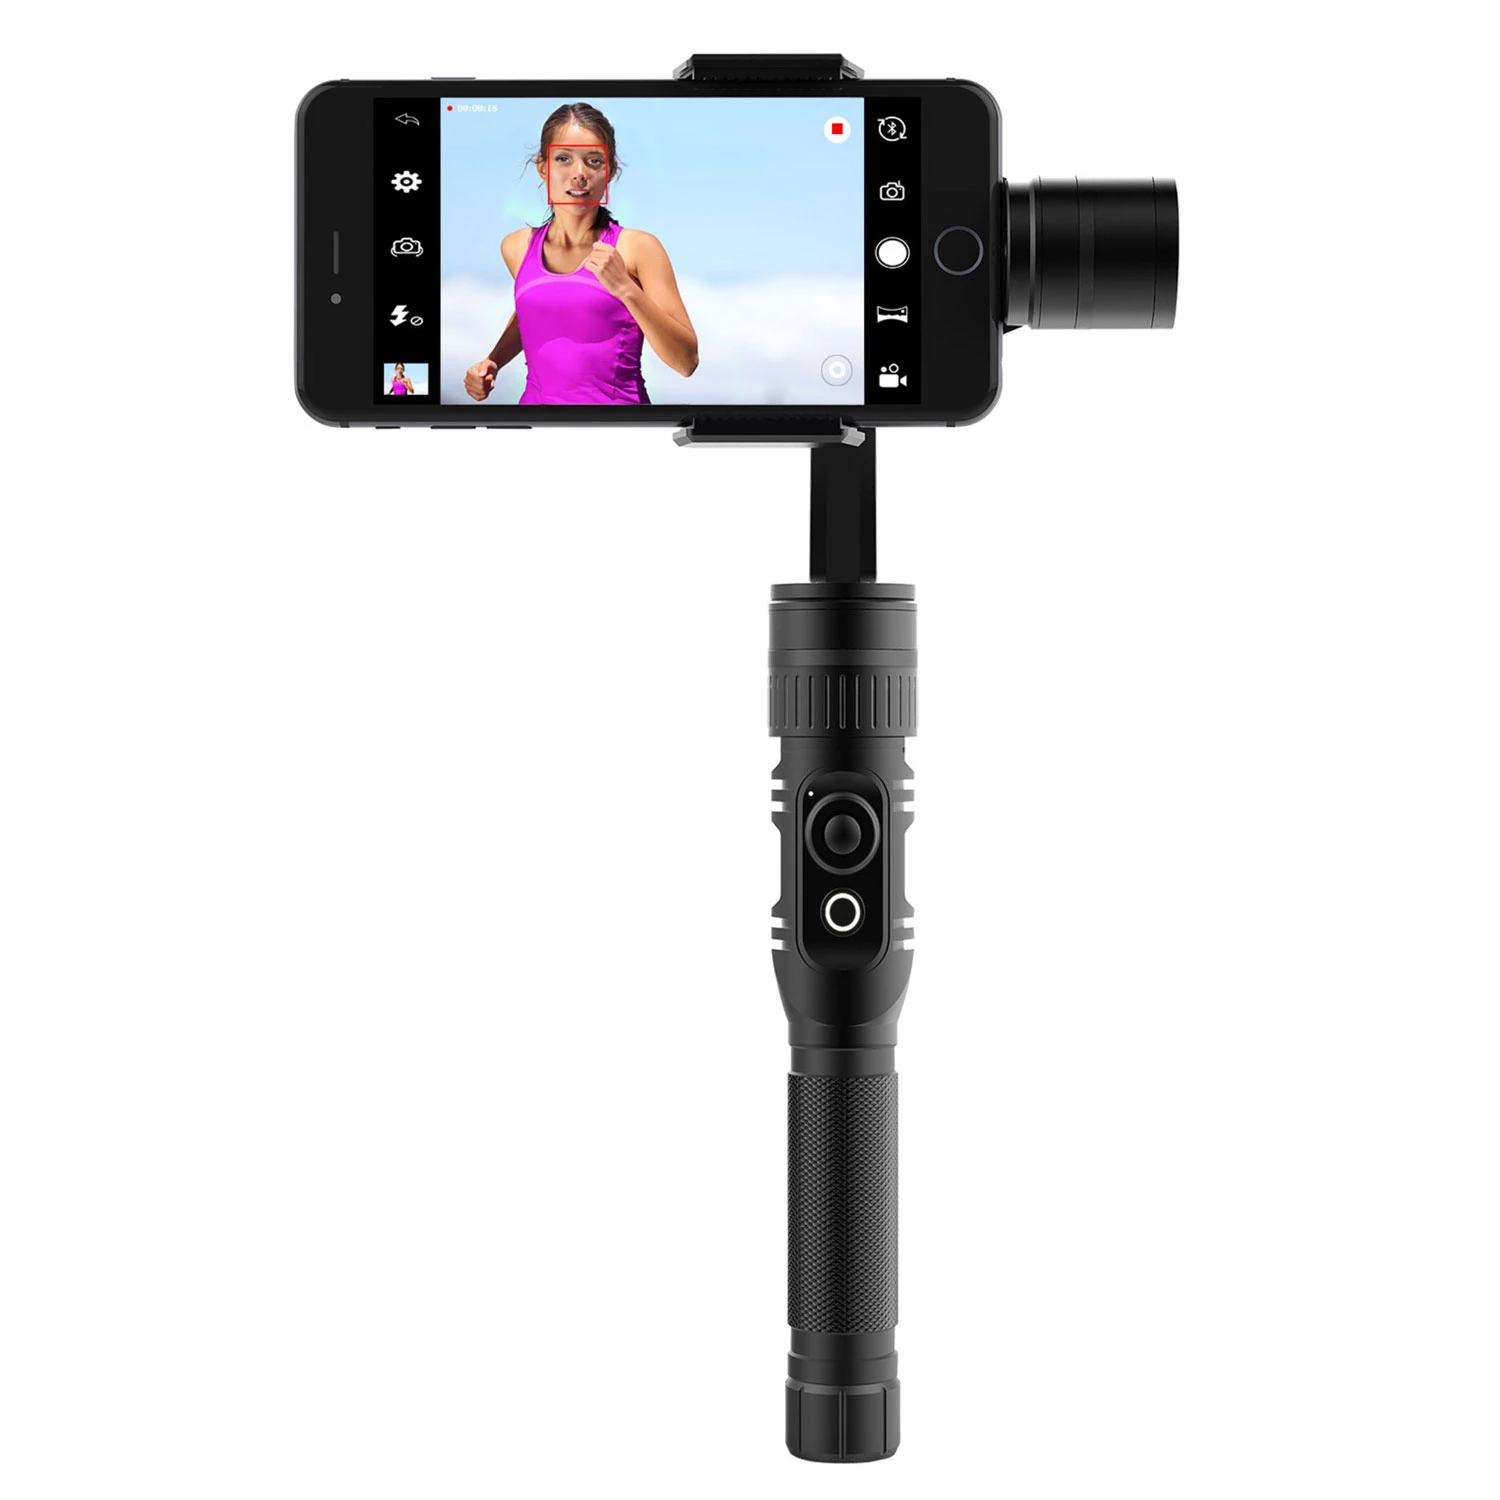 3-Axis Handheld Gimbal Stabilizer for Smartphones - Up to 6" Screen Size